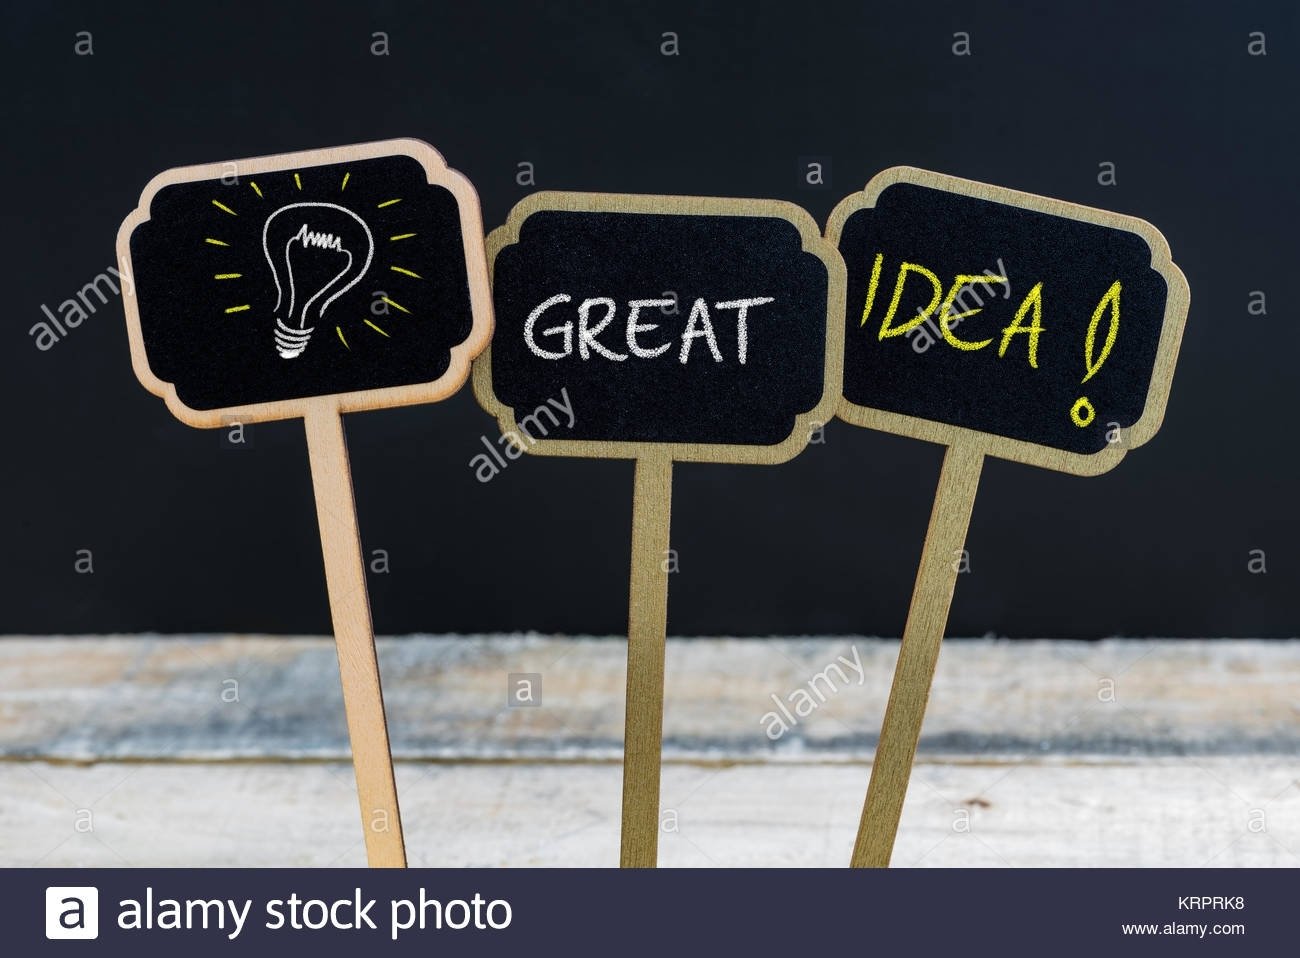 10 Attractive Binta And The Great Idea great idea stock photos great idea stock images alamy 2 2022